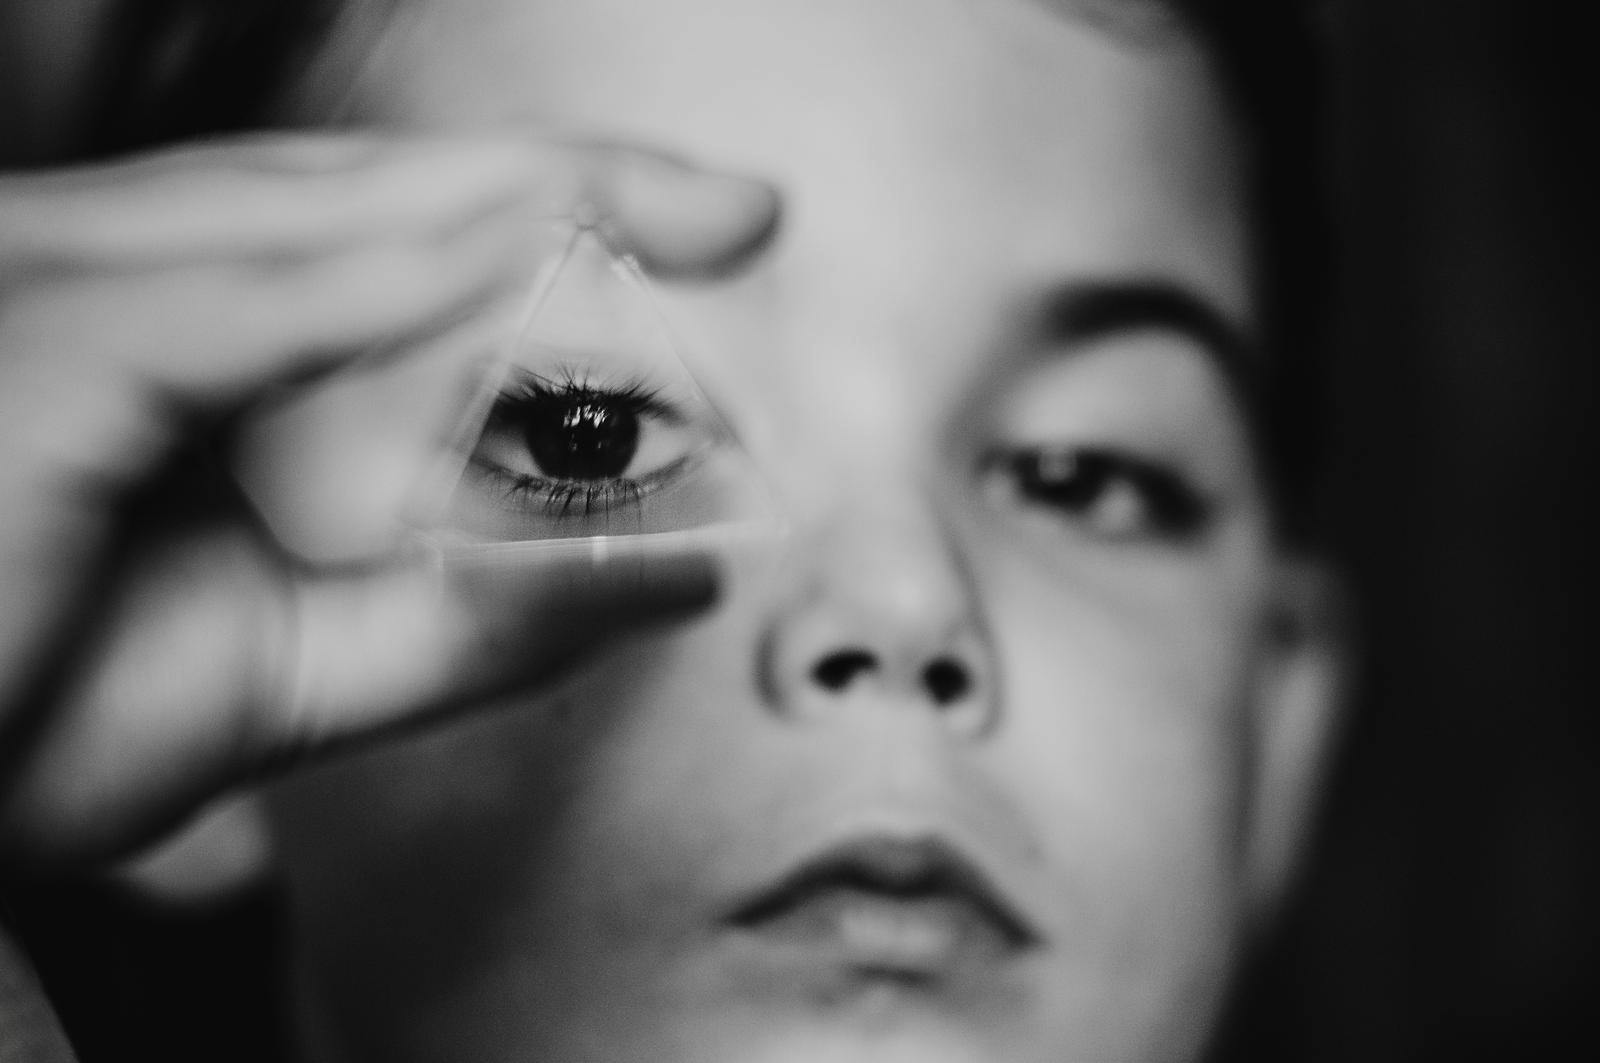 Boy looking through glass prism with one eye.